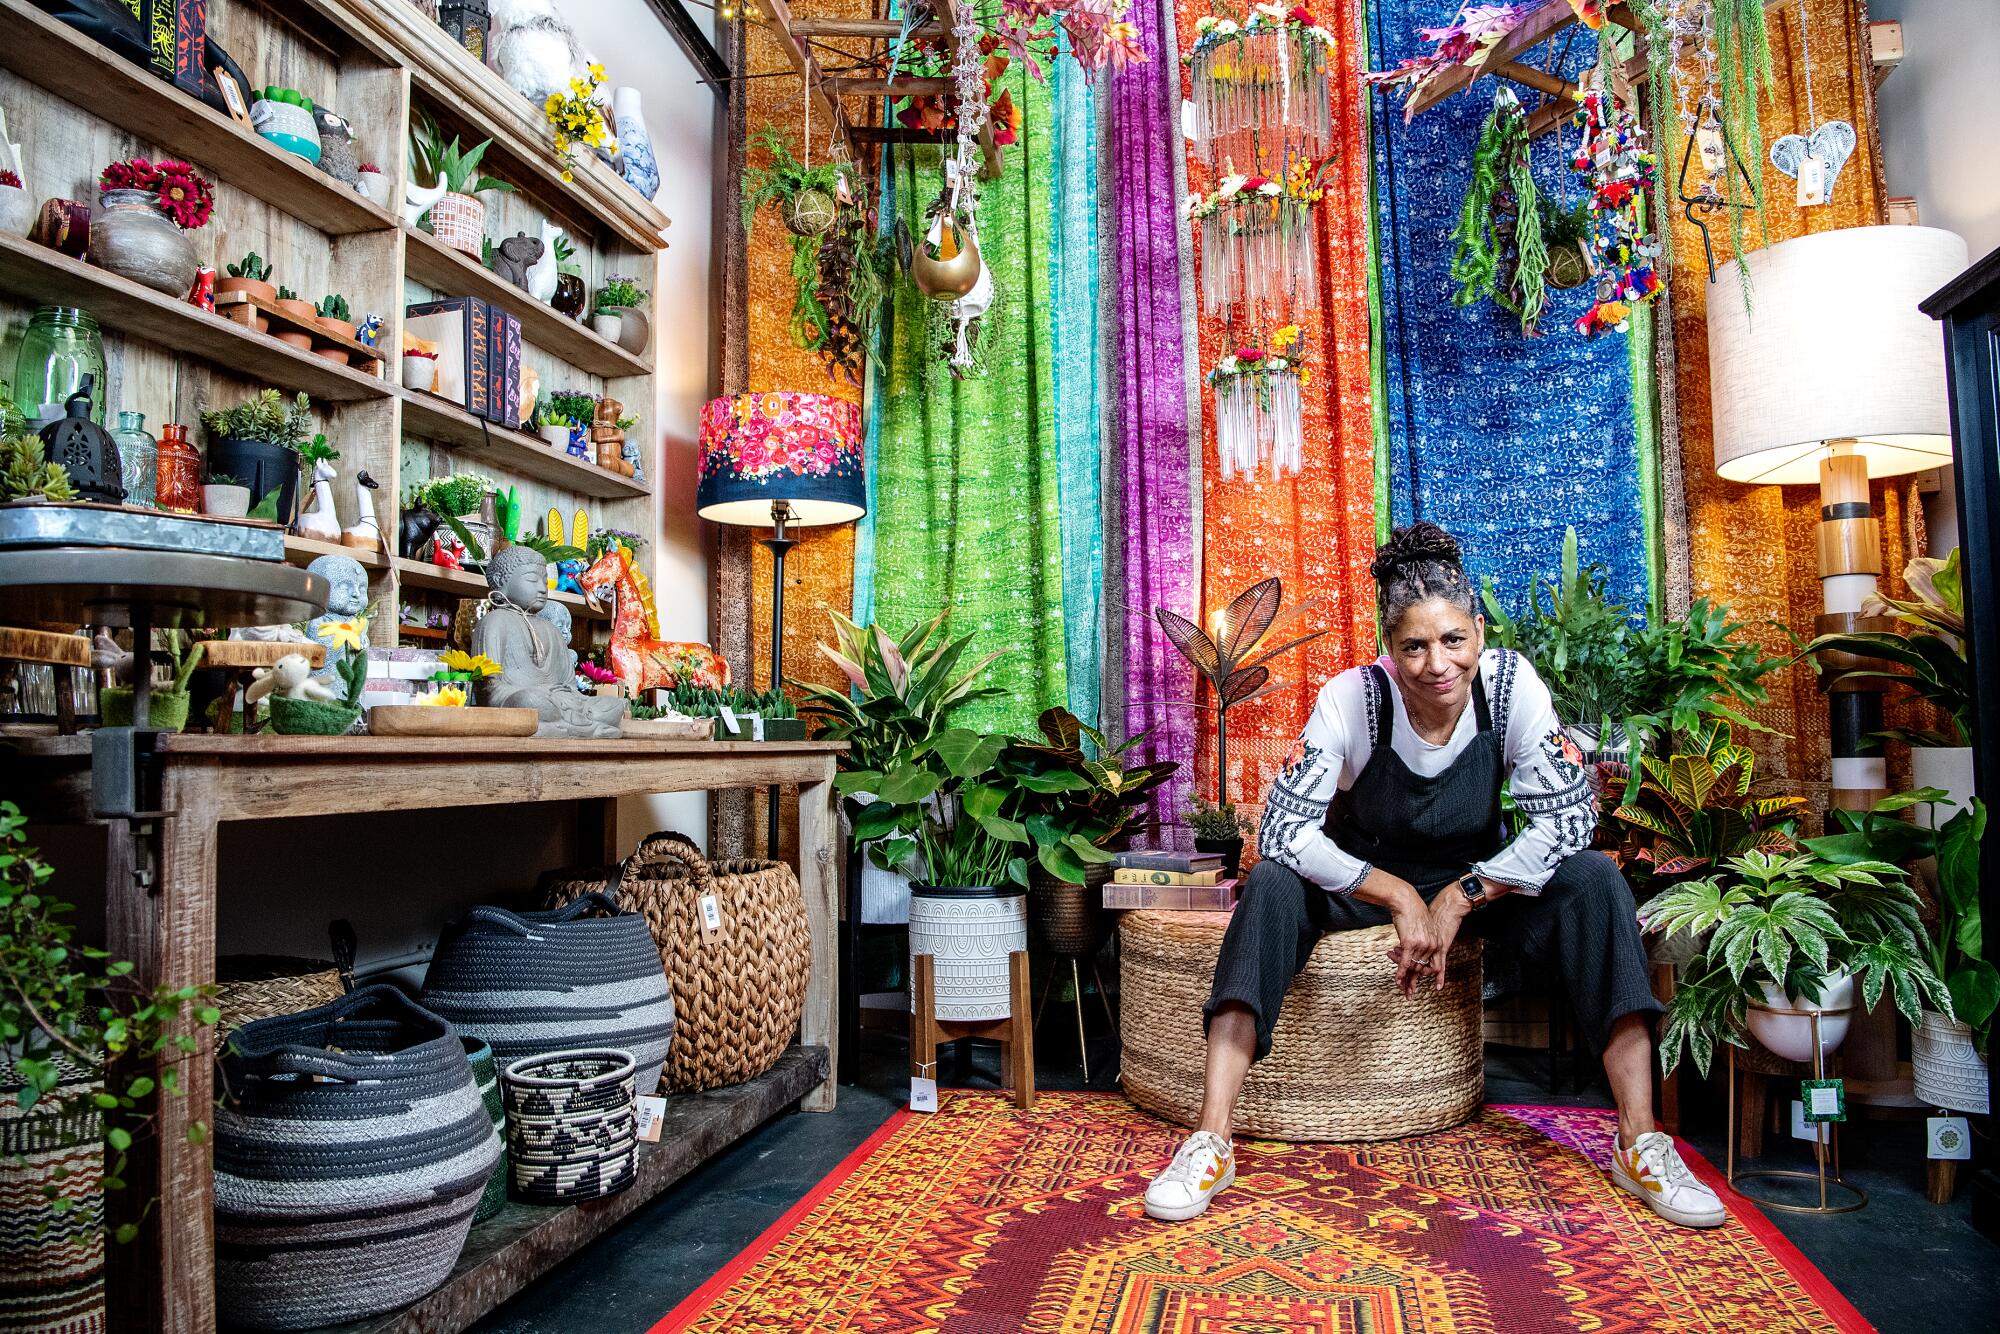 A seated woman surrounded by colorful plants and fabrics.